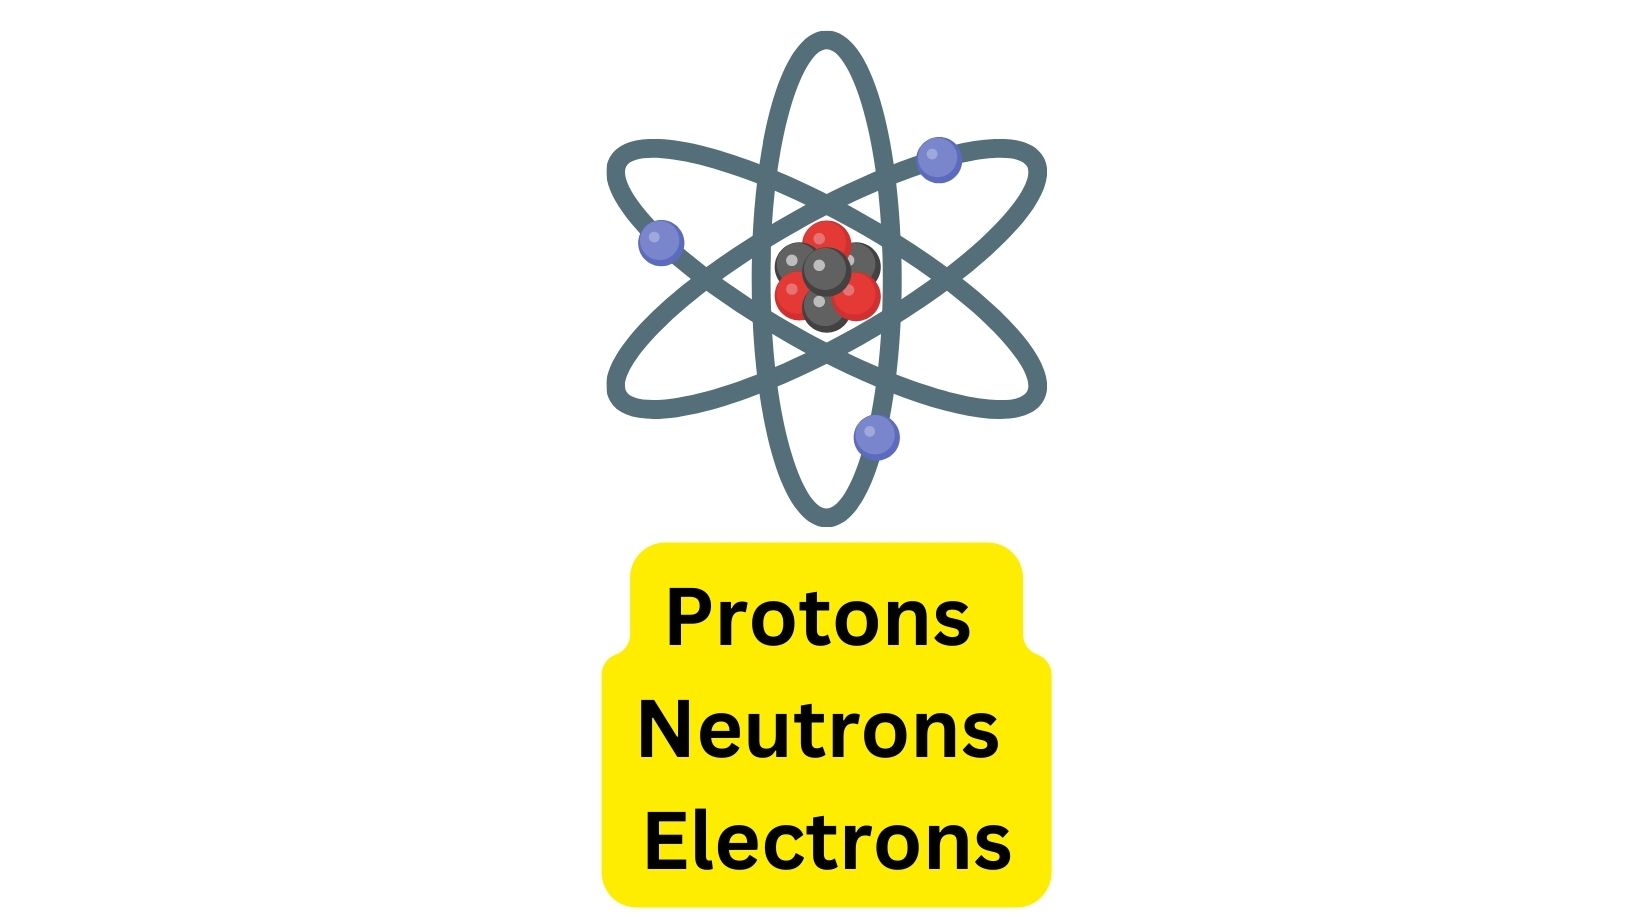 Protons, Neutrons and Electrons